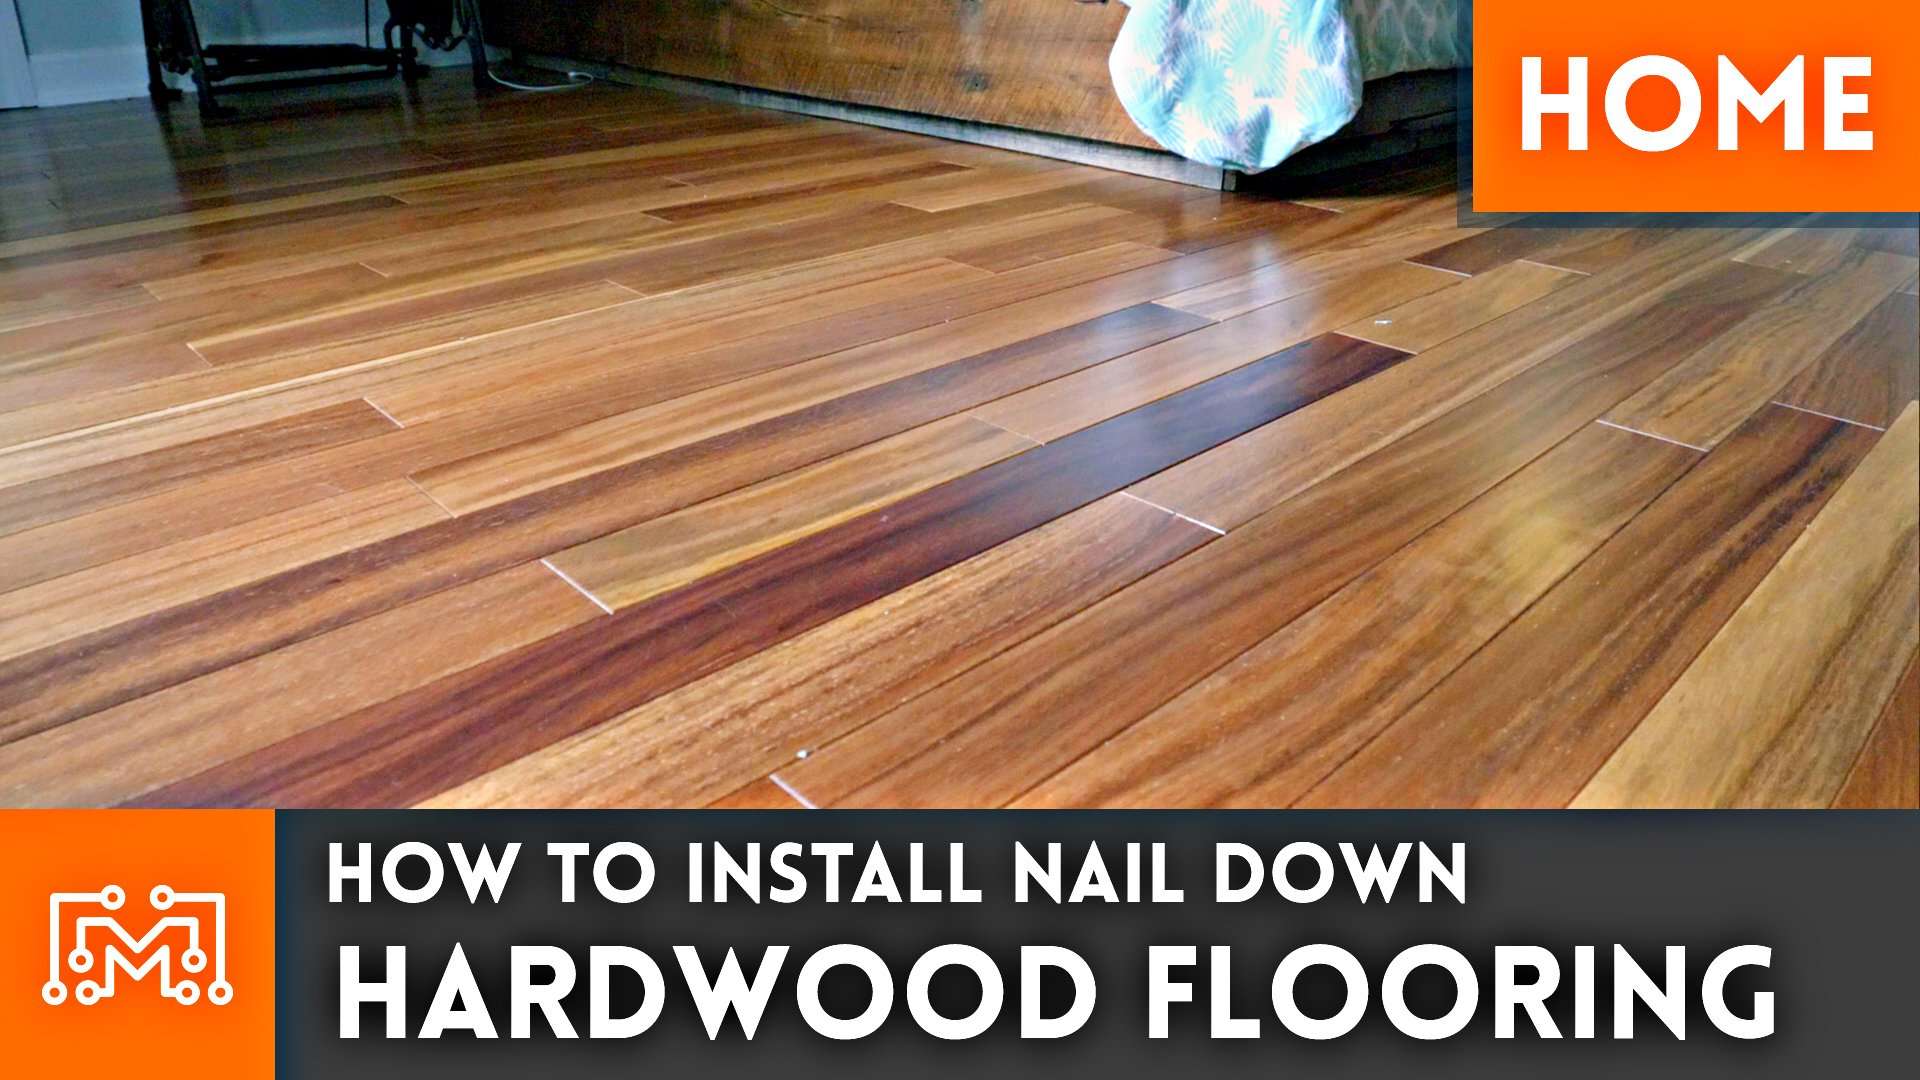 How to install nail down hardwood flooring // Home ...